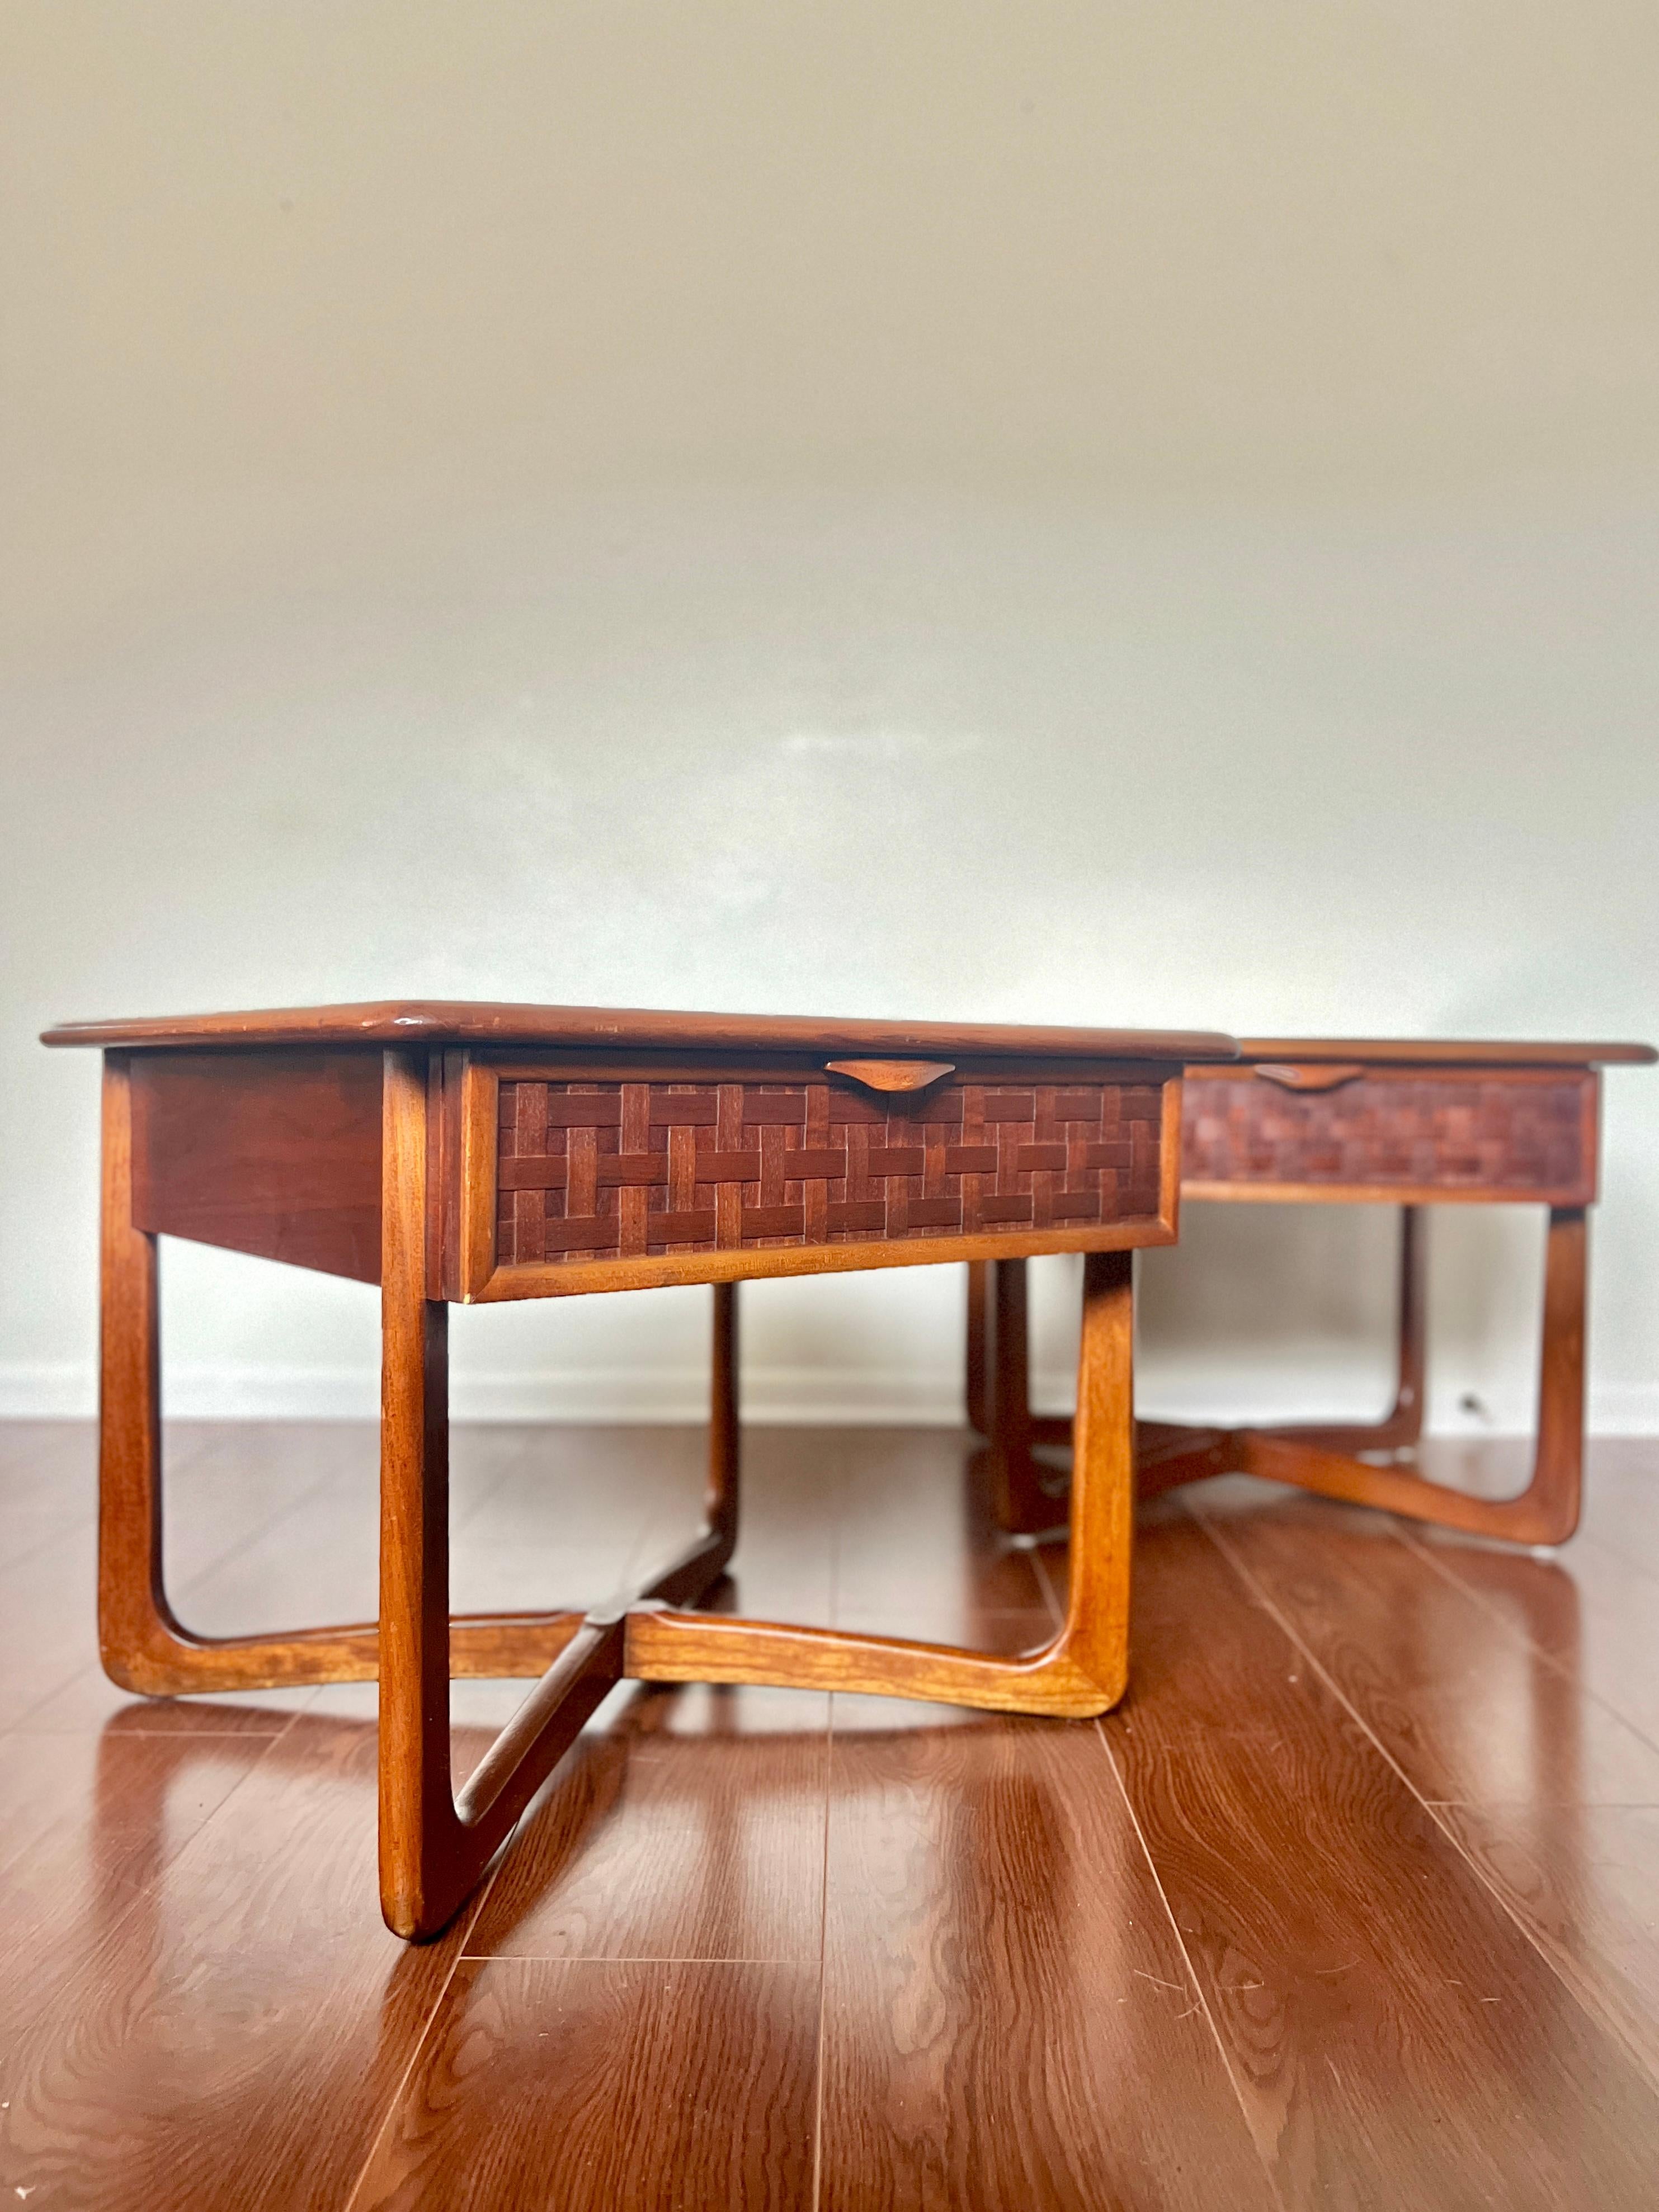 A pair of Mid-Century Modern lane perception side tables with a cross cross base. Quality American construction paired with fine design. Top surface is walnut wood with contrasting oak trim tracing the perimeter. Elegant woven wood facade and solid